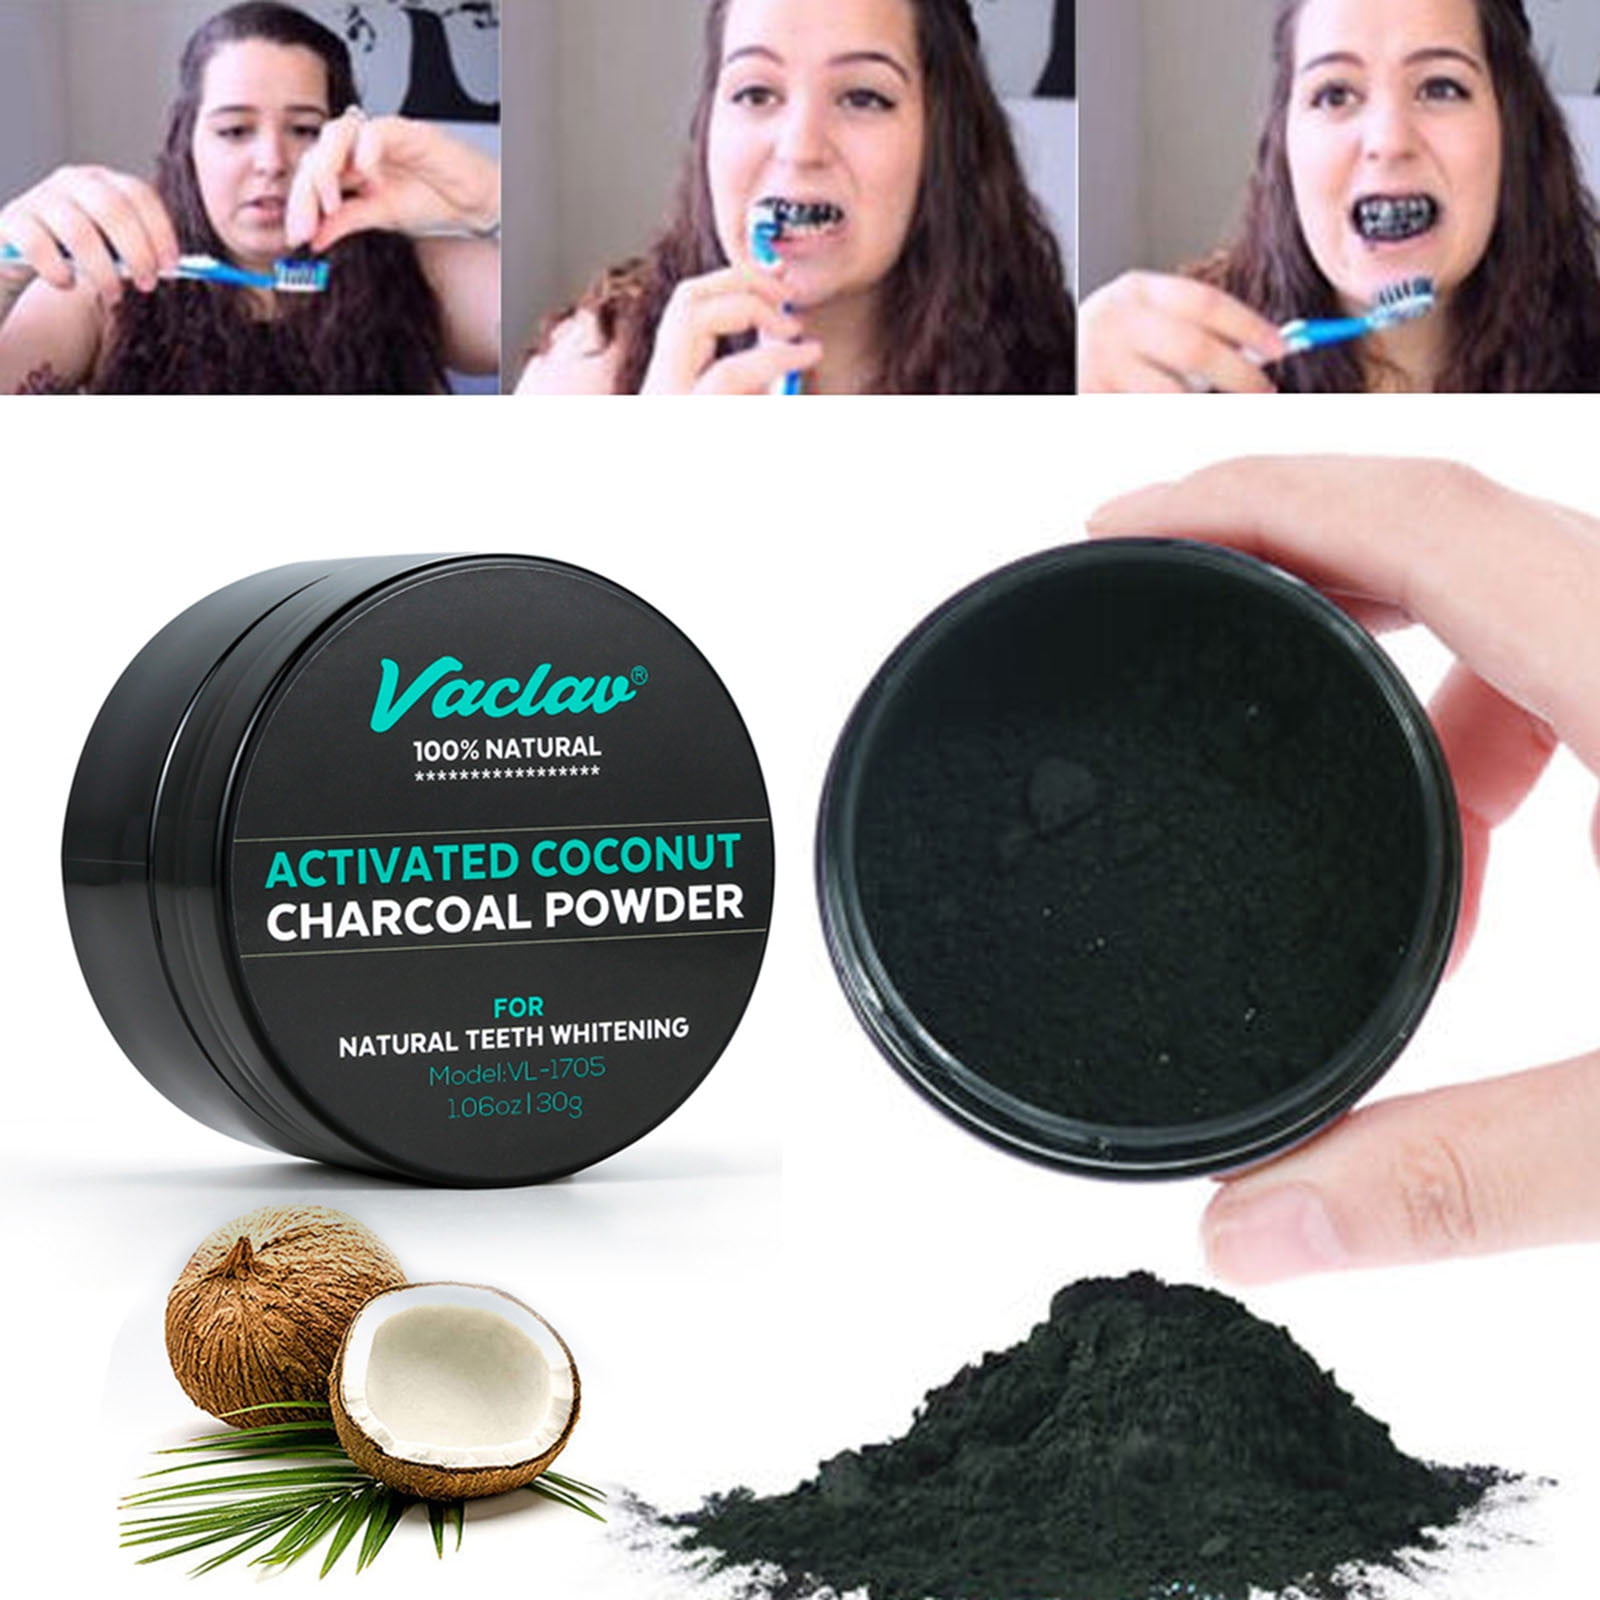 Activated Charcoal Powder – iSmile Whitening